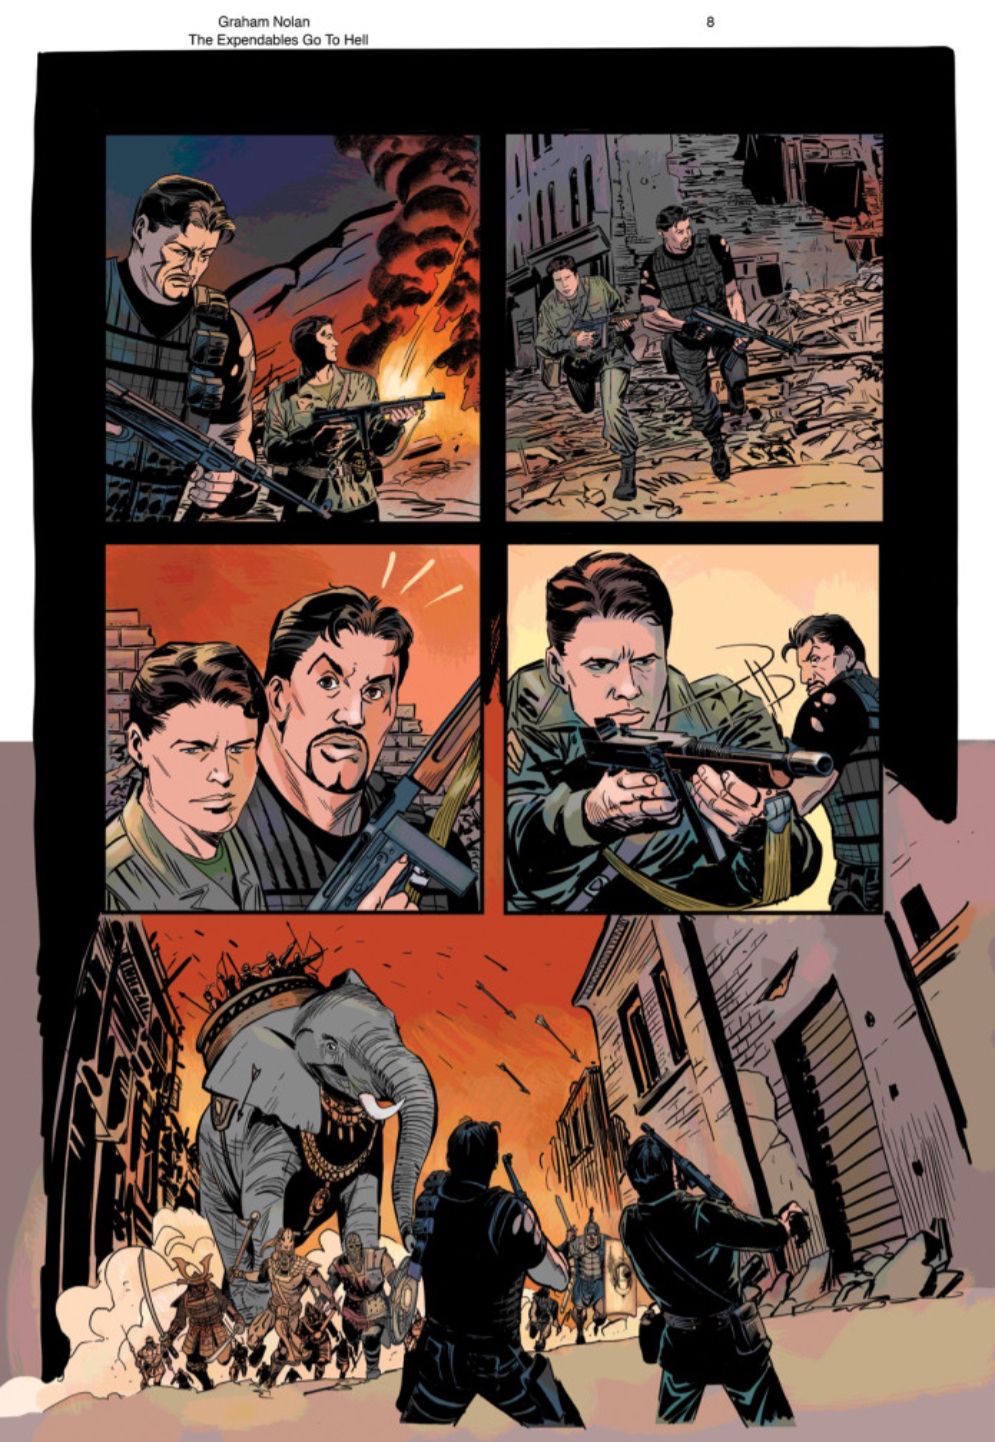 The Expendables Go To Hell Graphic Novel Page 8